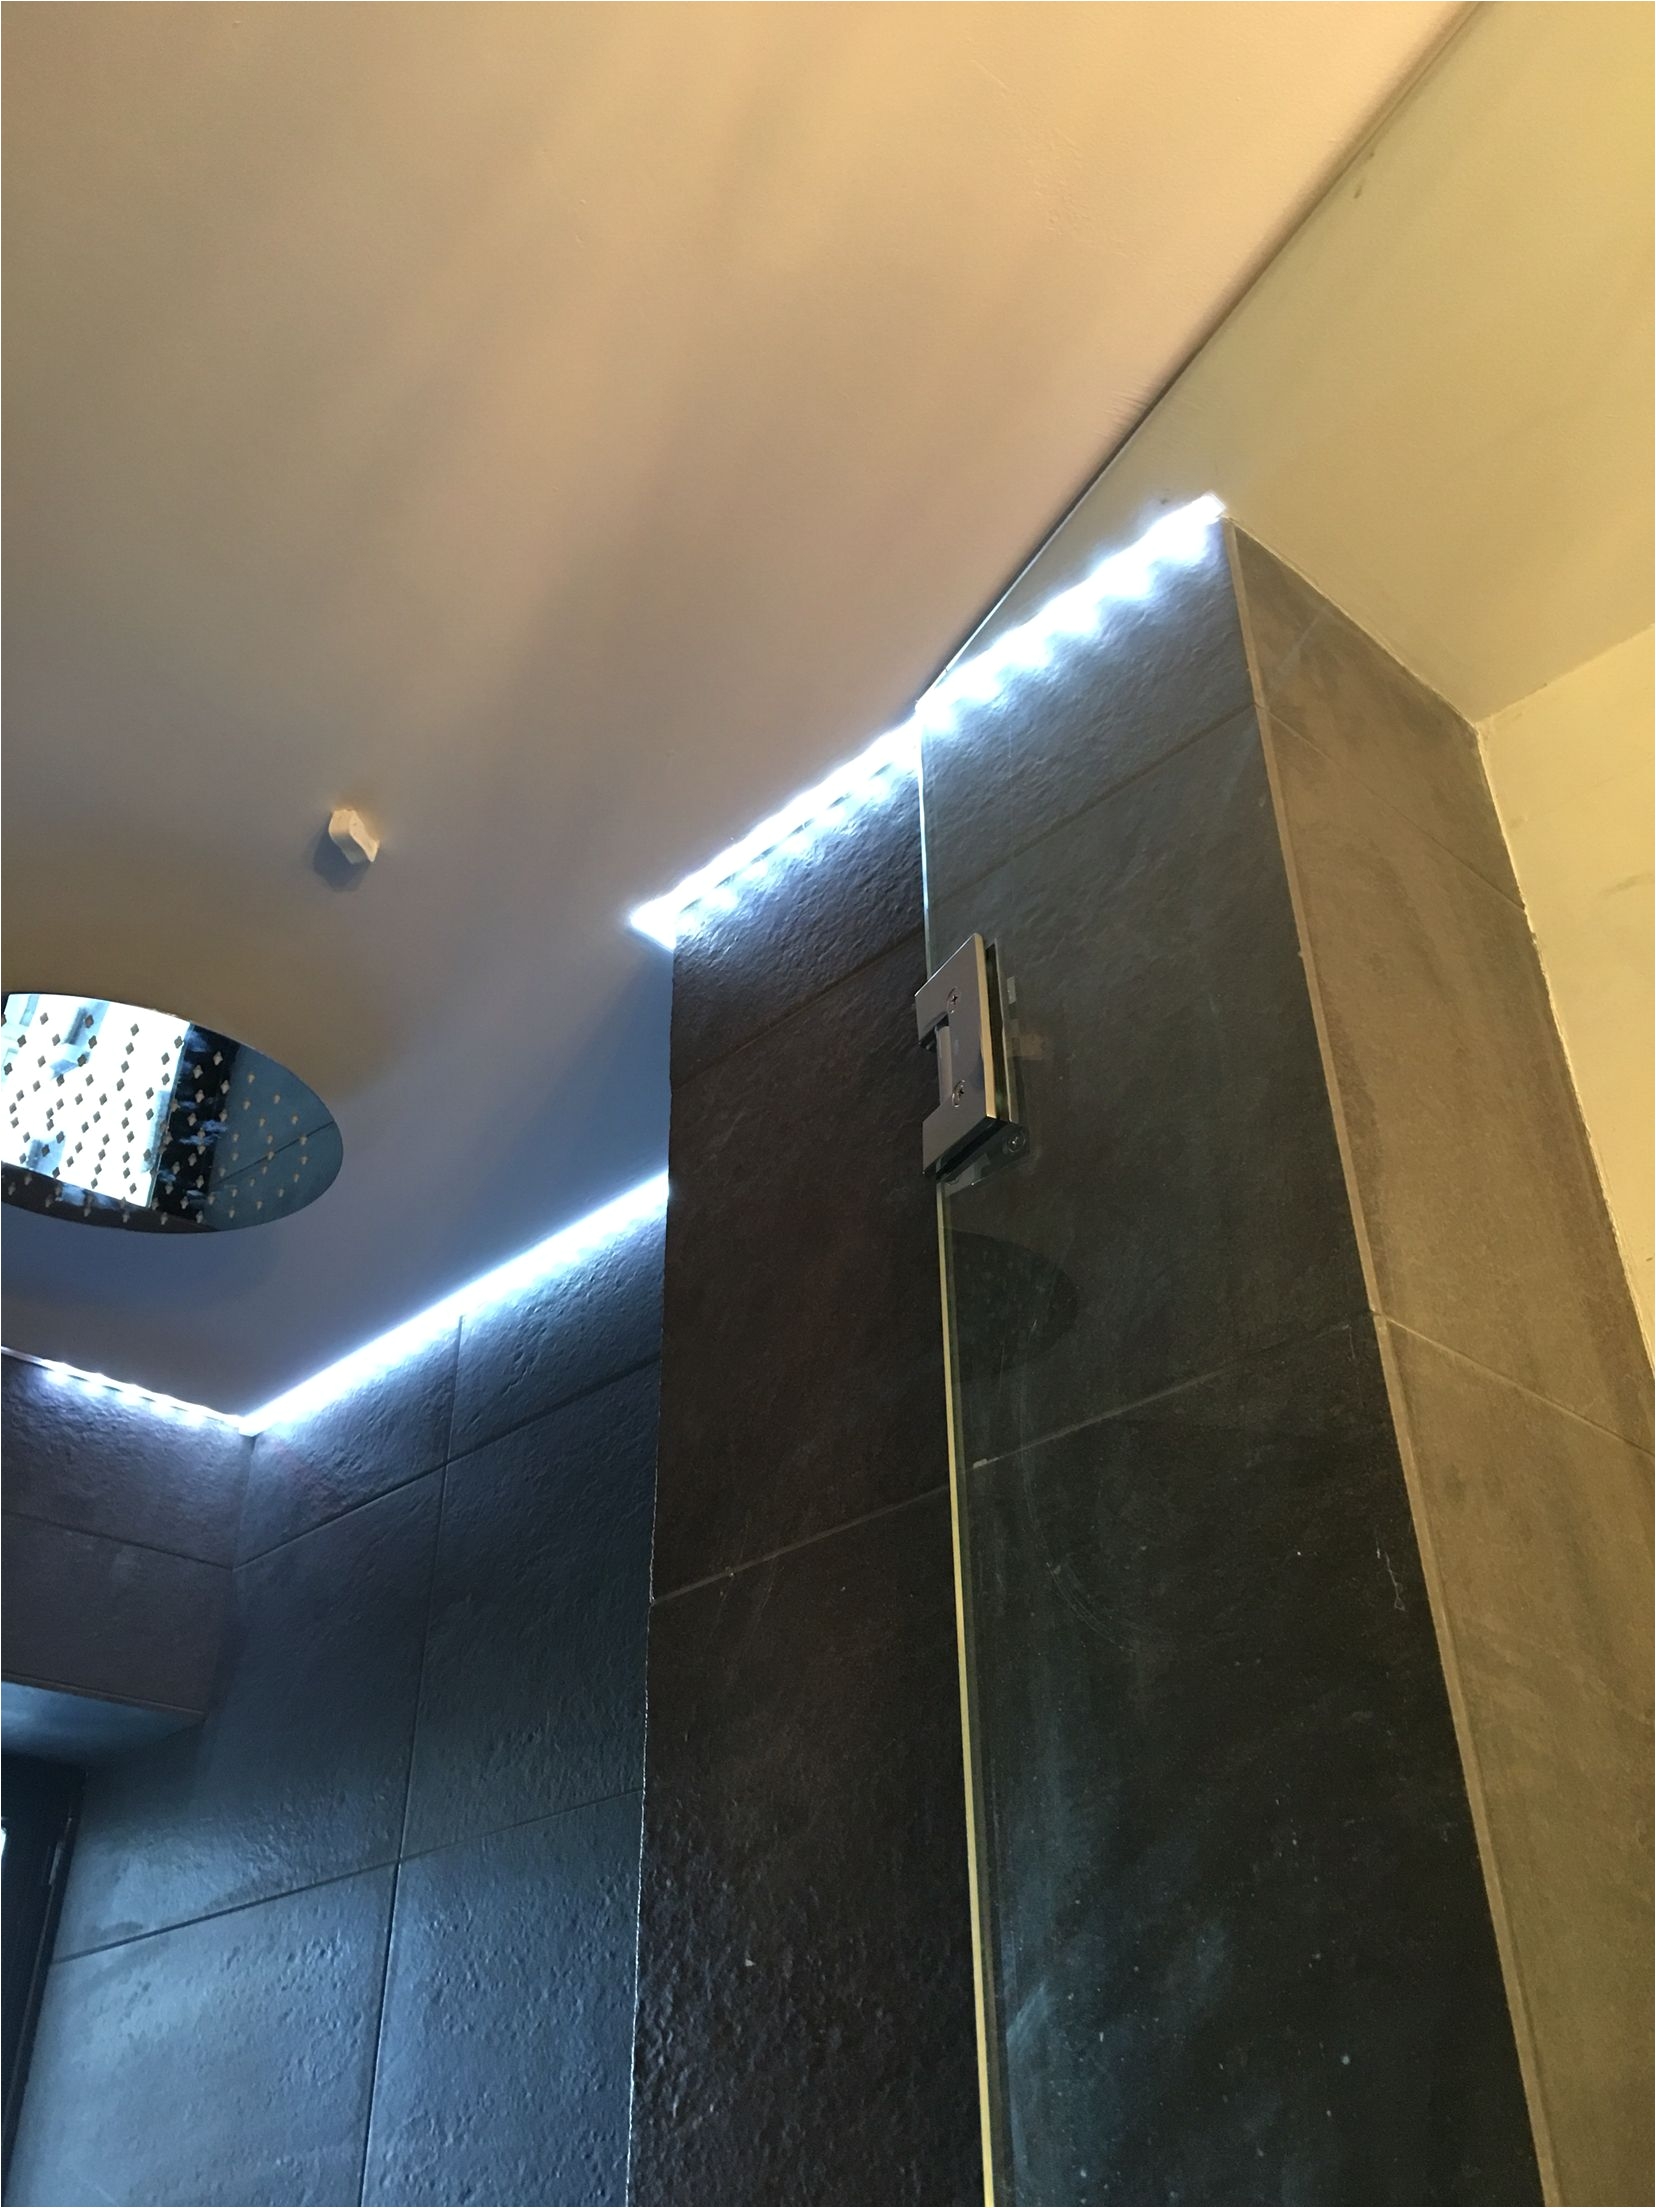 philips hue led strip in aluminum track with frosted lens this lighting is placed in a shower ceiling